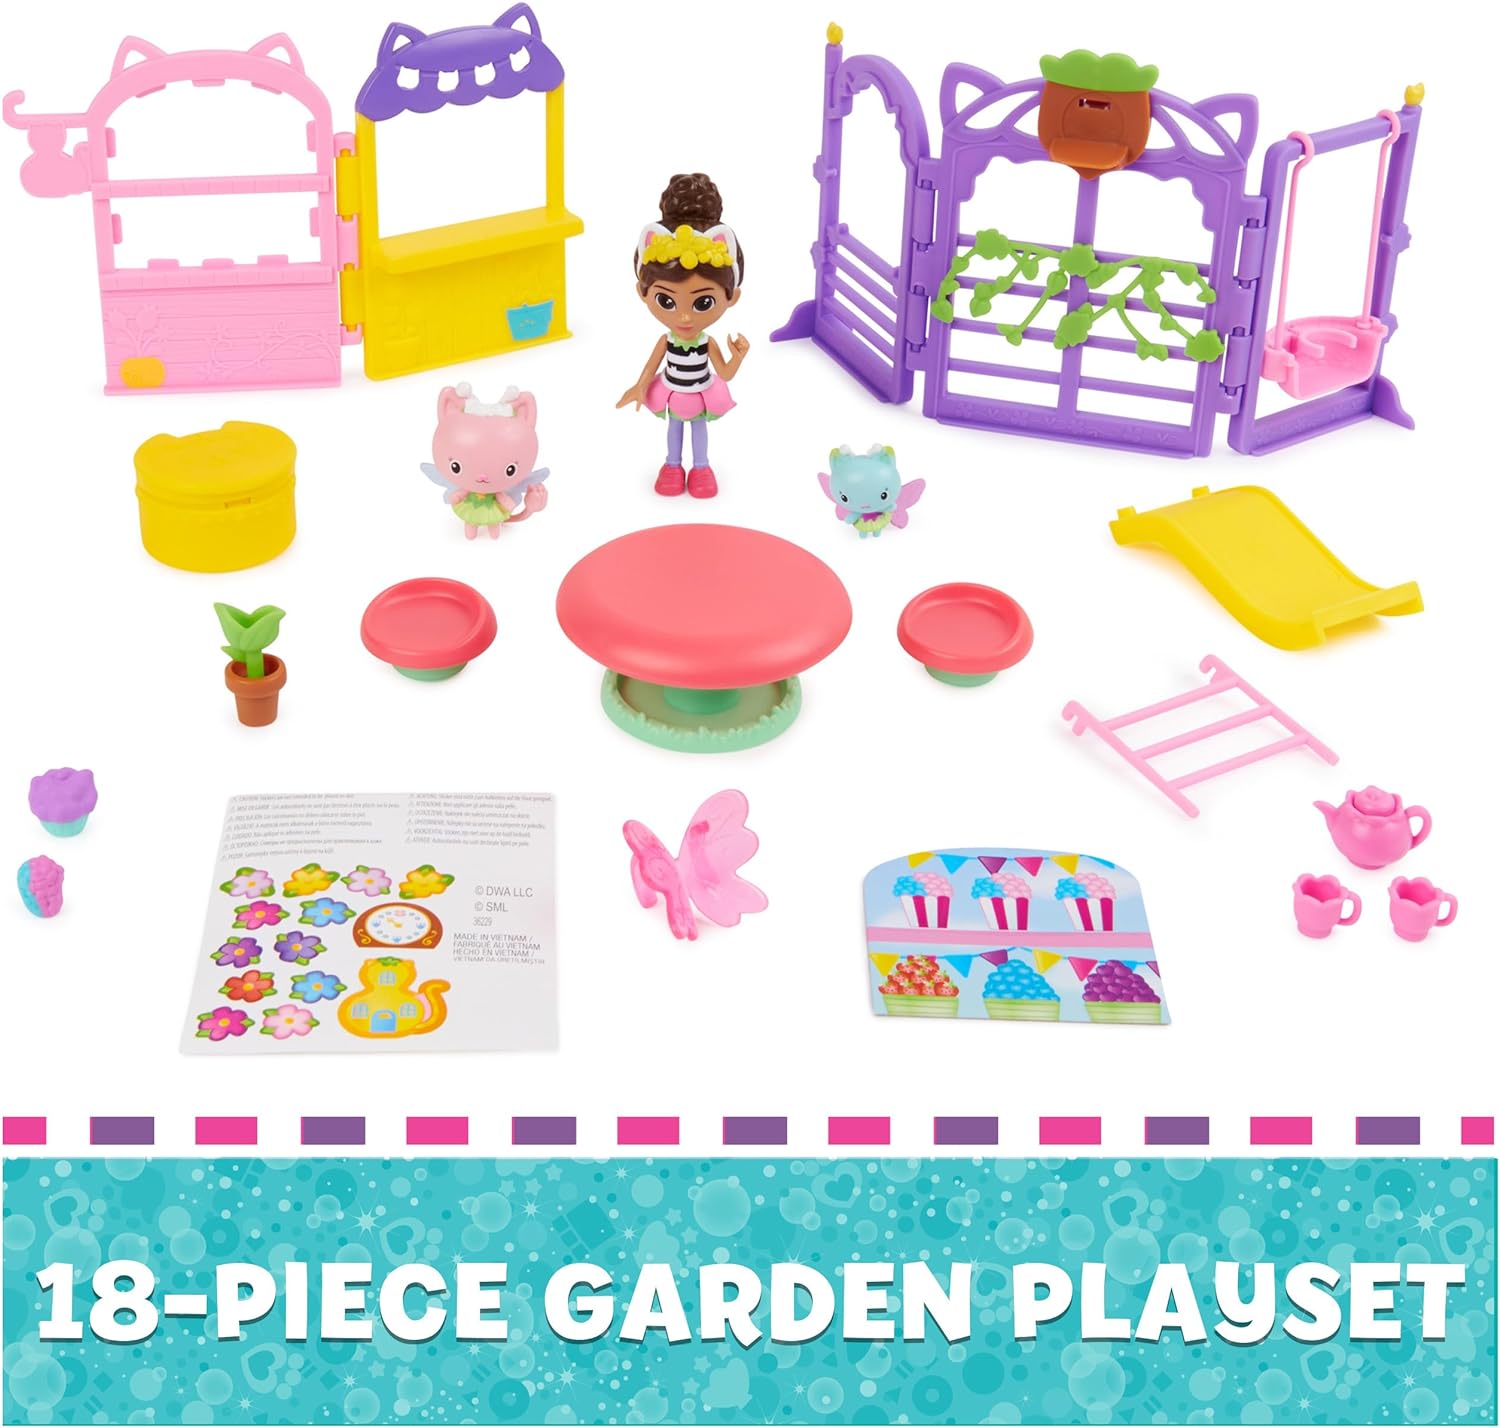 Gabby’s Dollhouse, Kitty Fairy Garden Party, 18-Piece Playset with 3 Toy Figures, Surprise Toys & Dollhouse Accessories, Kids Toys for Girls & Boys 3+